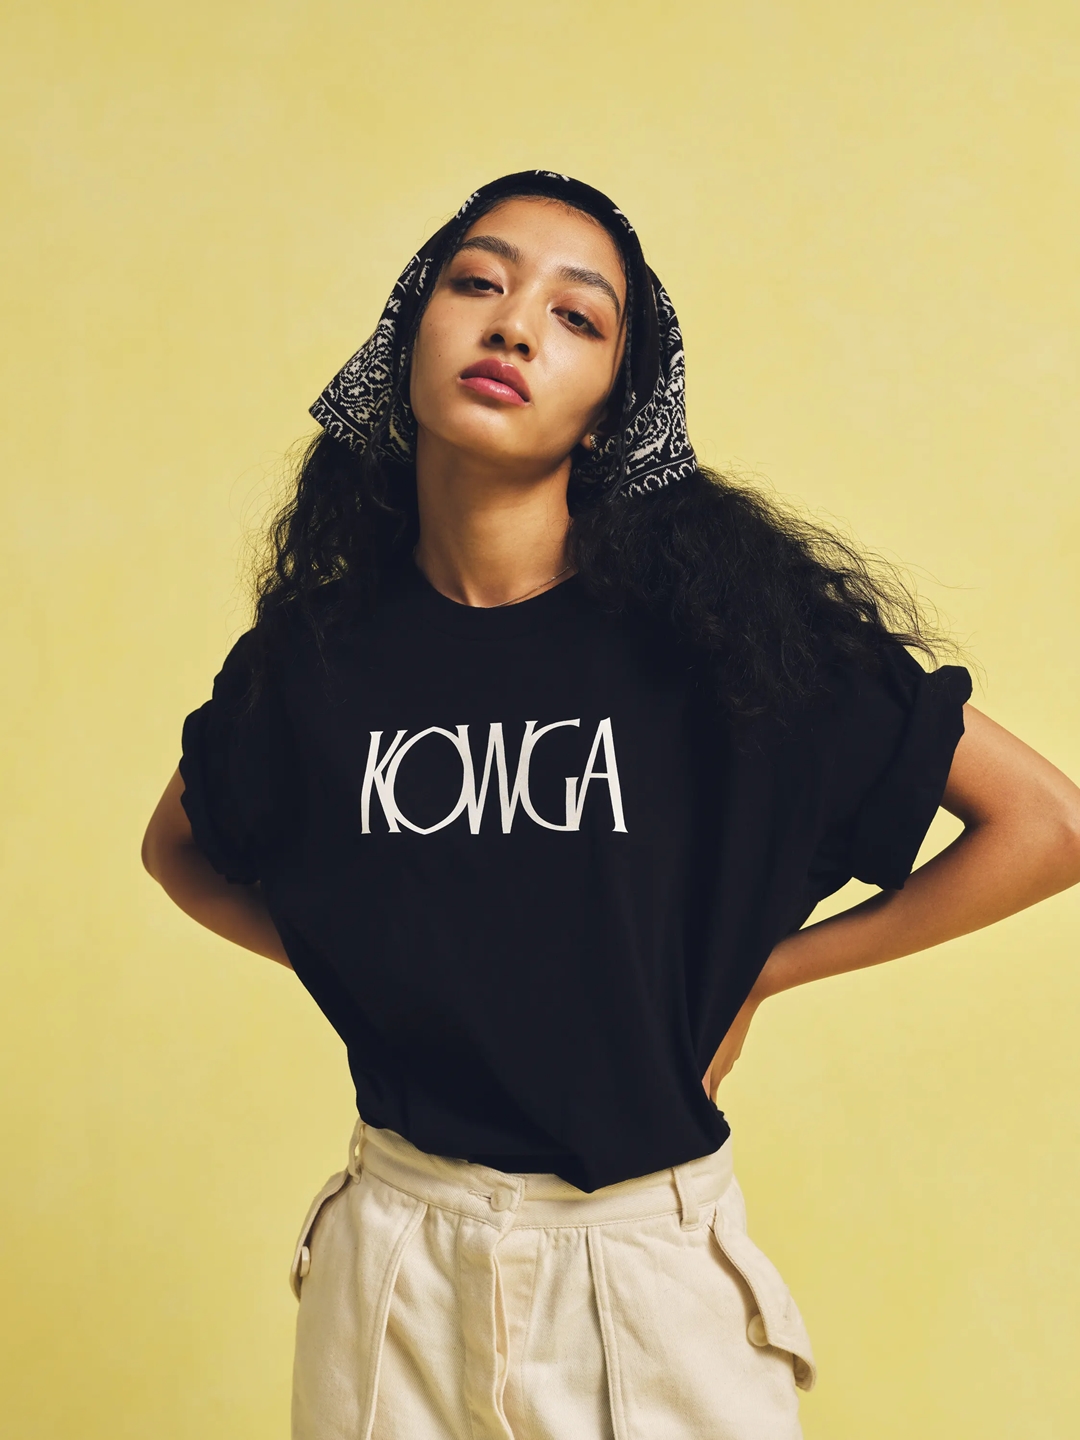 UNION × KOWGA “FOR HER FOR HIM” CAPSULE COLLECTIONが11/3 発売 (ユニオン コウガ)